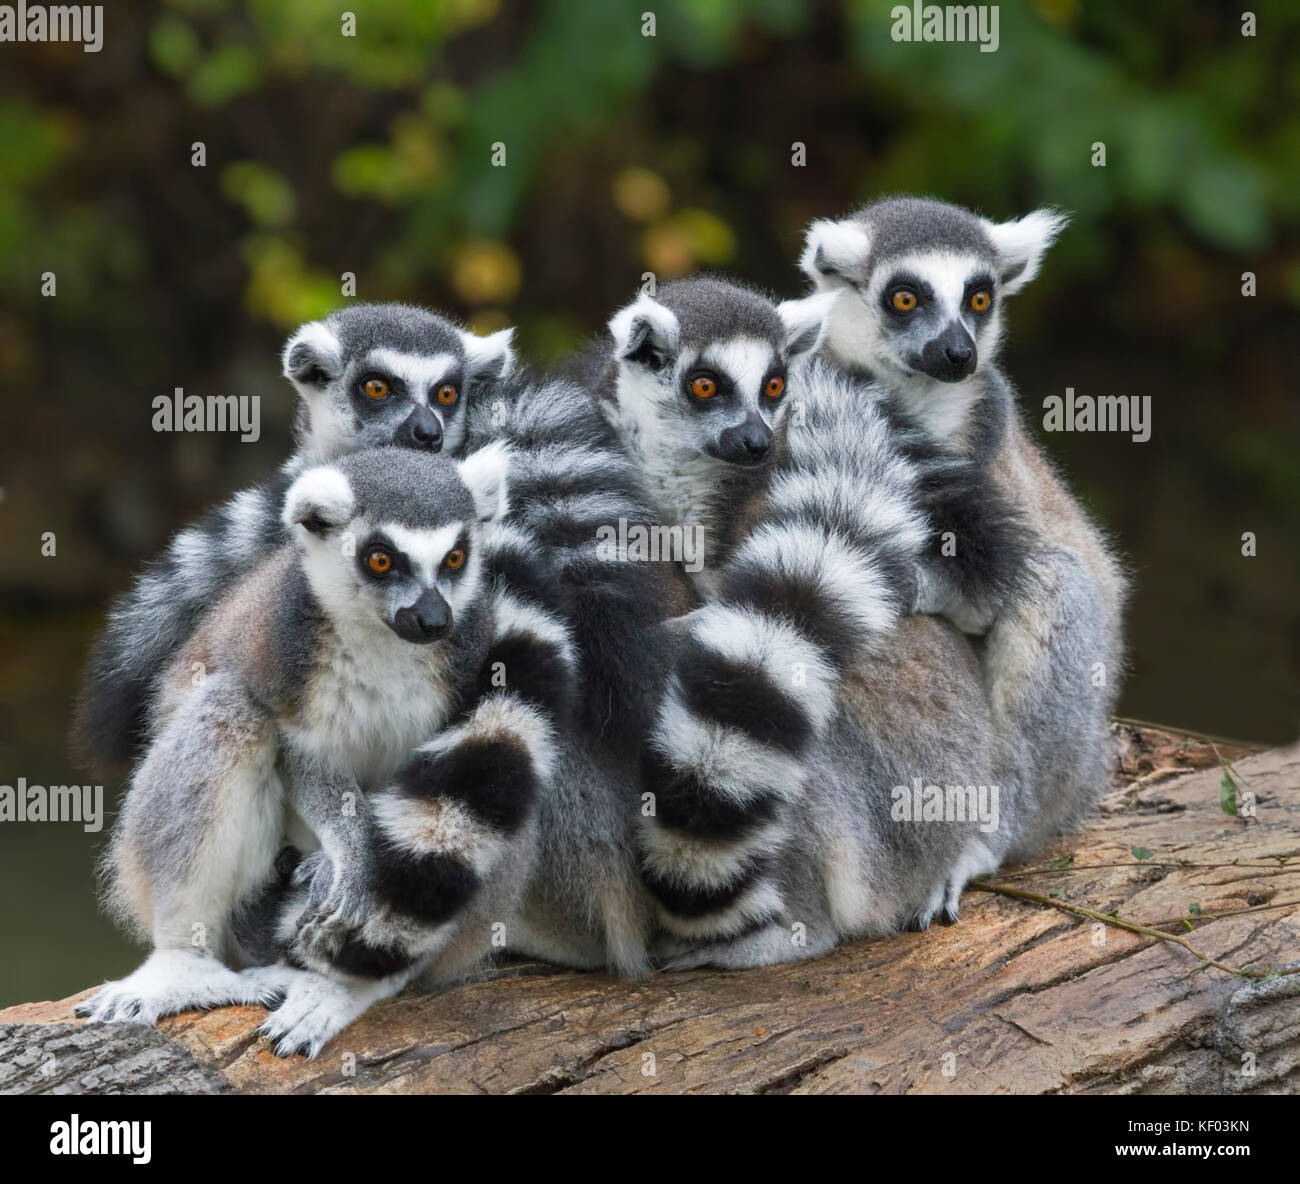 Group of alerted ring-tailed lemurs Stock Photo